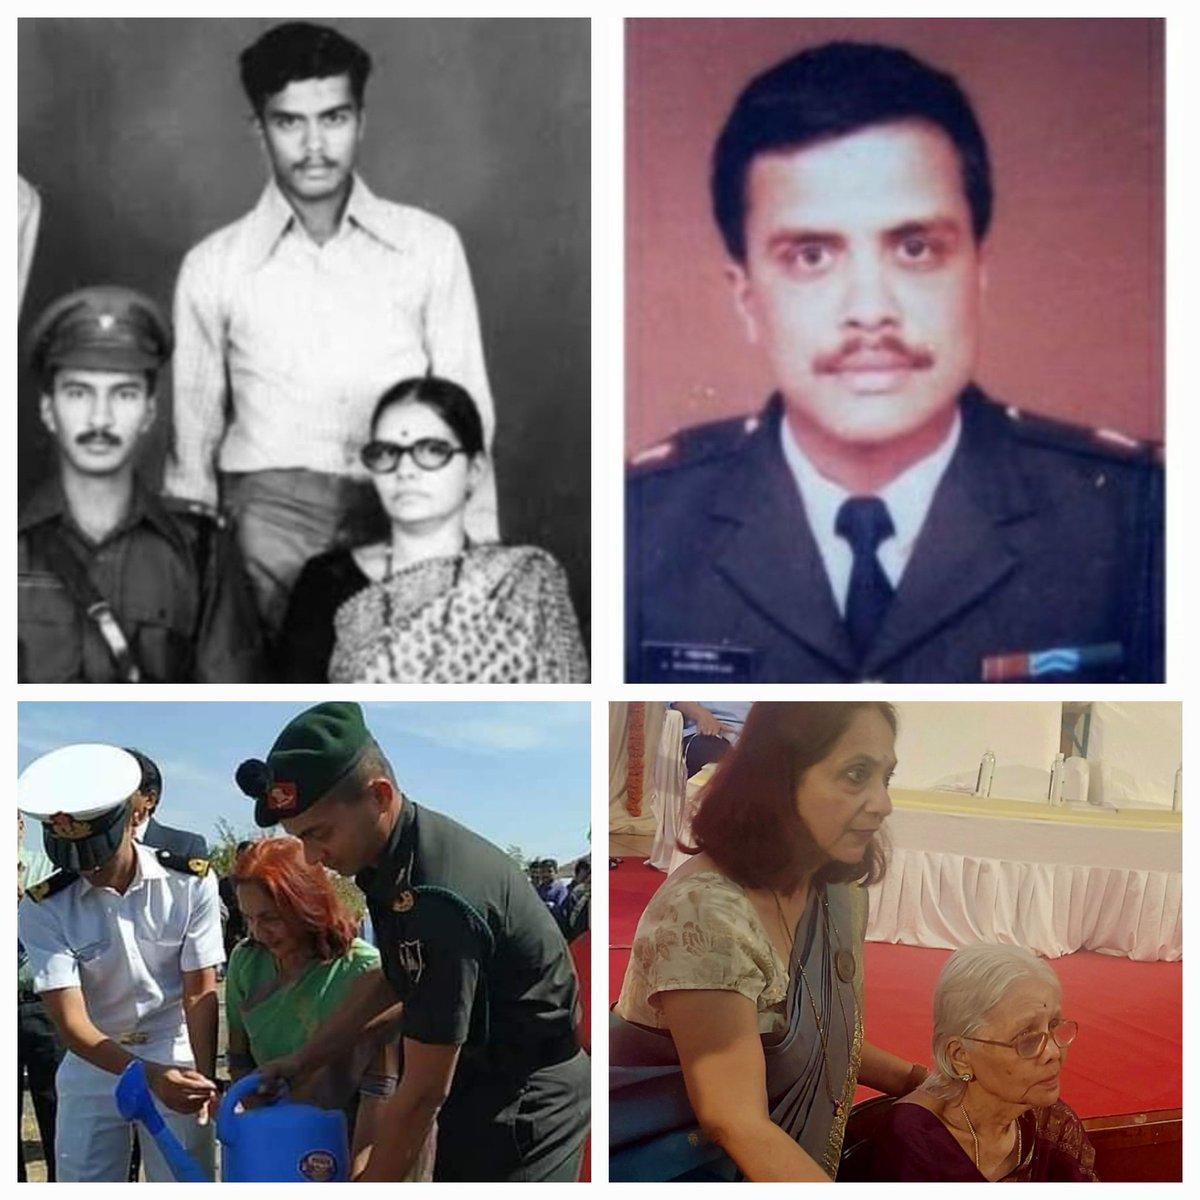 #KnowOurHeroes #VeerParivaar 
Today, on his blessed birthday in the stars, can't help feeling how proud Braveheart Lt Col Ajit Bhandarkar SC must be to see his family become a role model to so many of us...

Its an honour for me to share this story of two #mothers of #Bharat,…